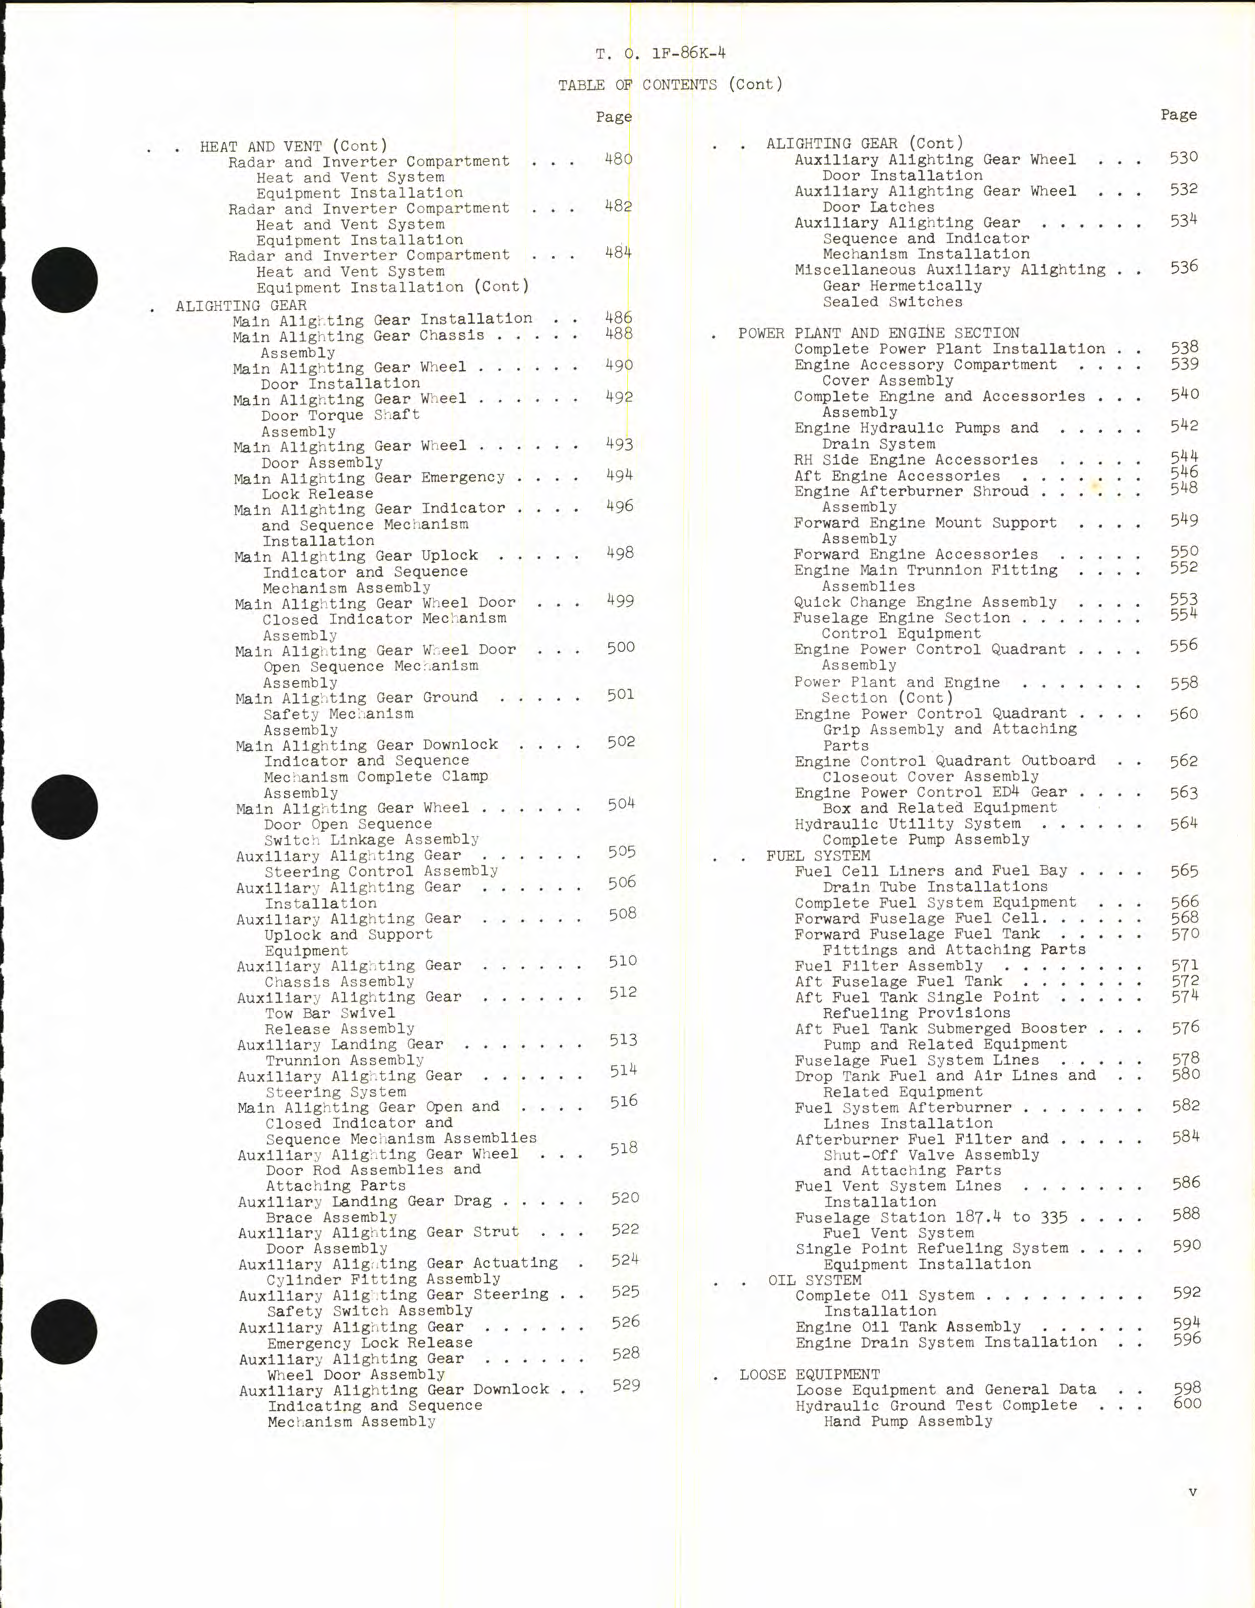 Sample page 7 from AirCorps Library document: Illustrated Parts Breakdown for F-86K Aircraft